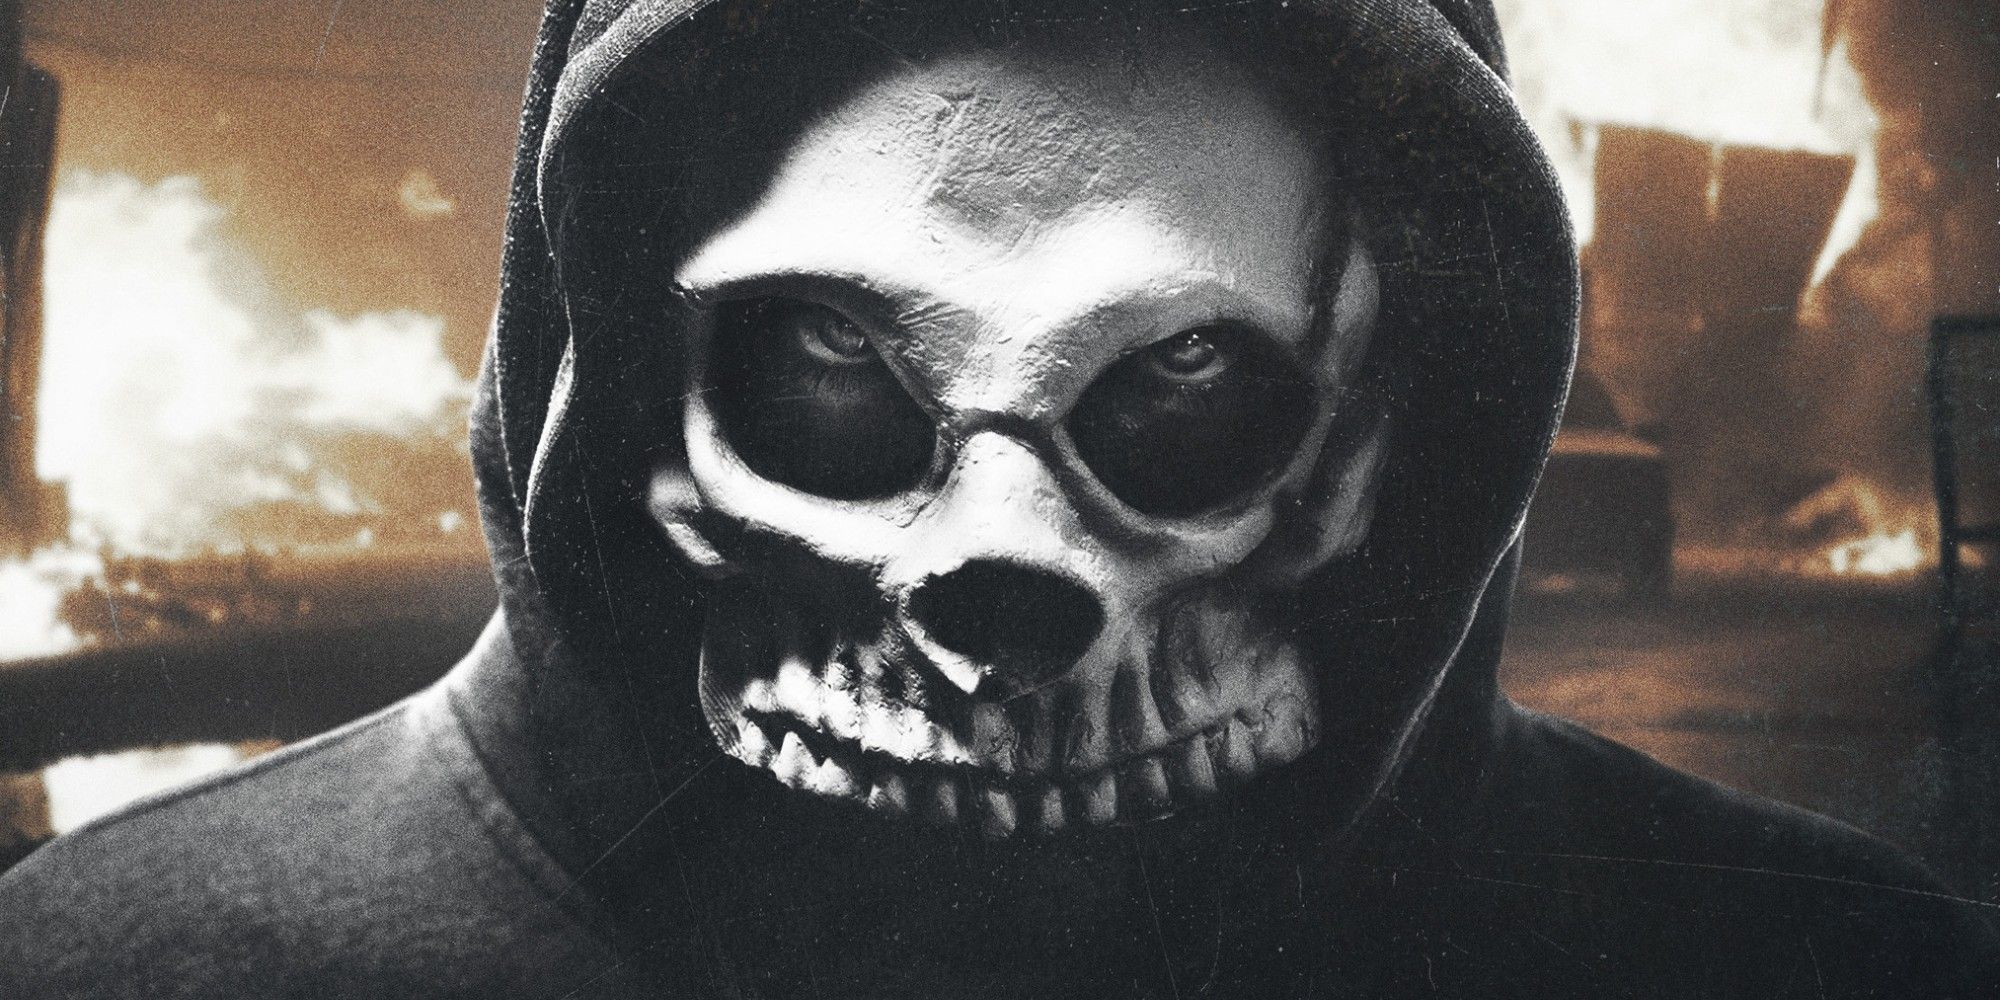 The First Purge skull mask poster